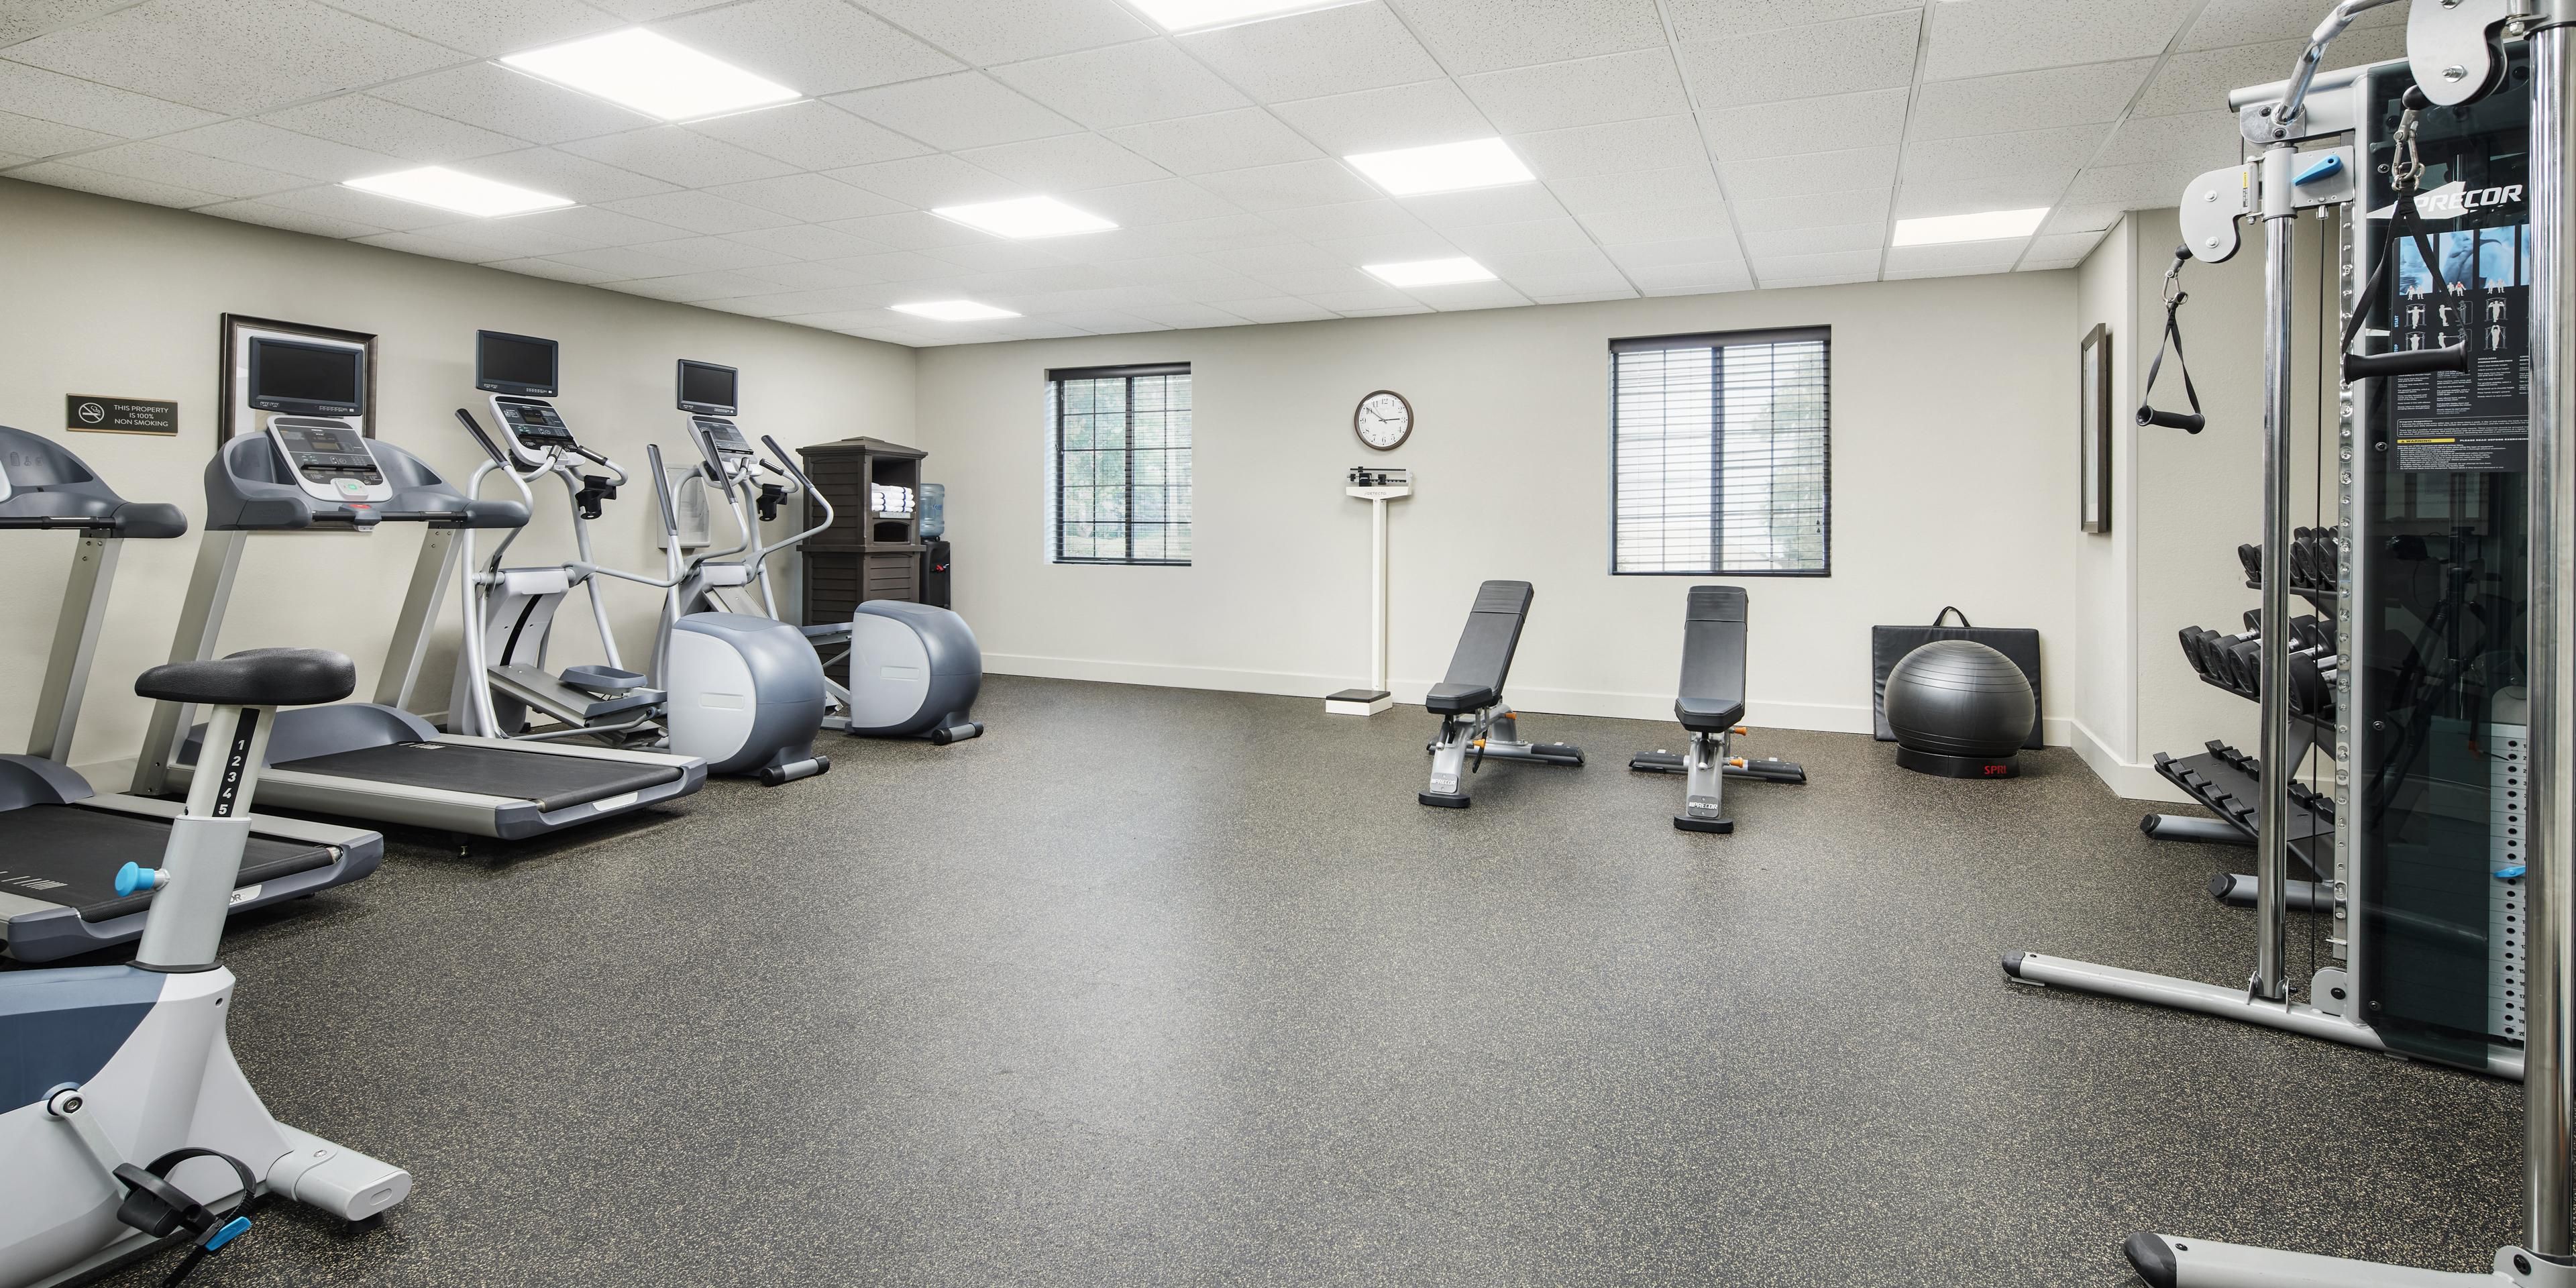 Maintain your workout in our state-of-the-art fitness center